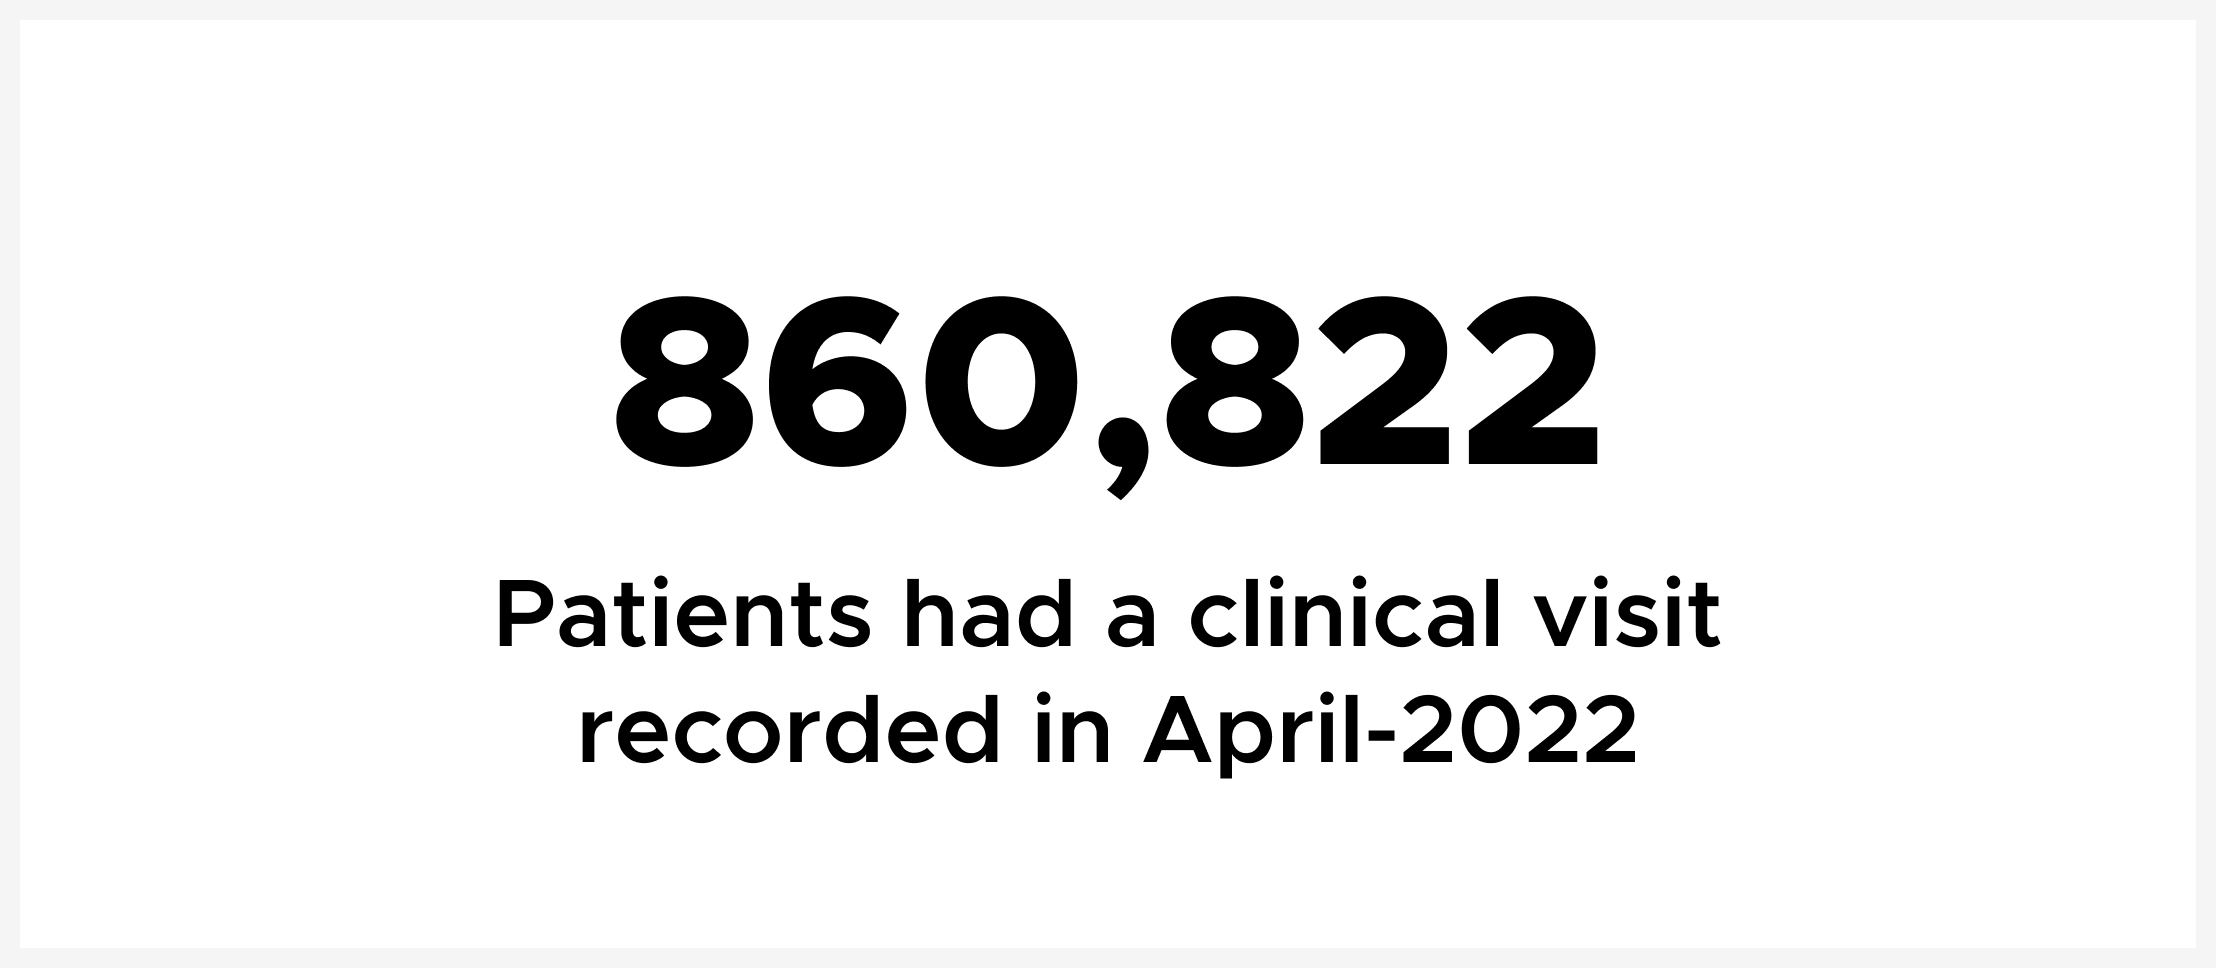 860,822 patients had a clinical visit recorded in April 2022